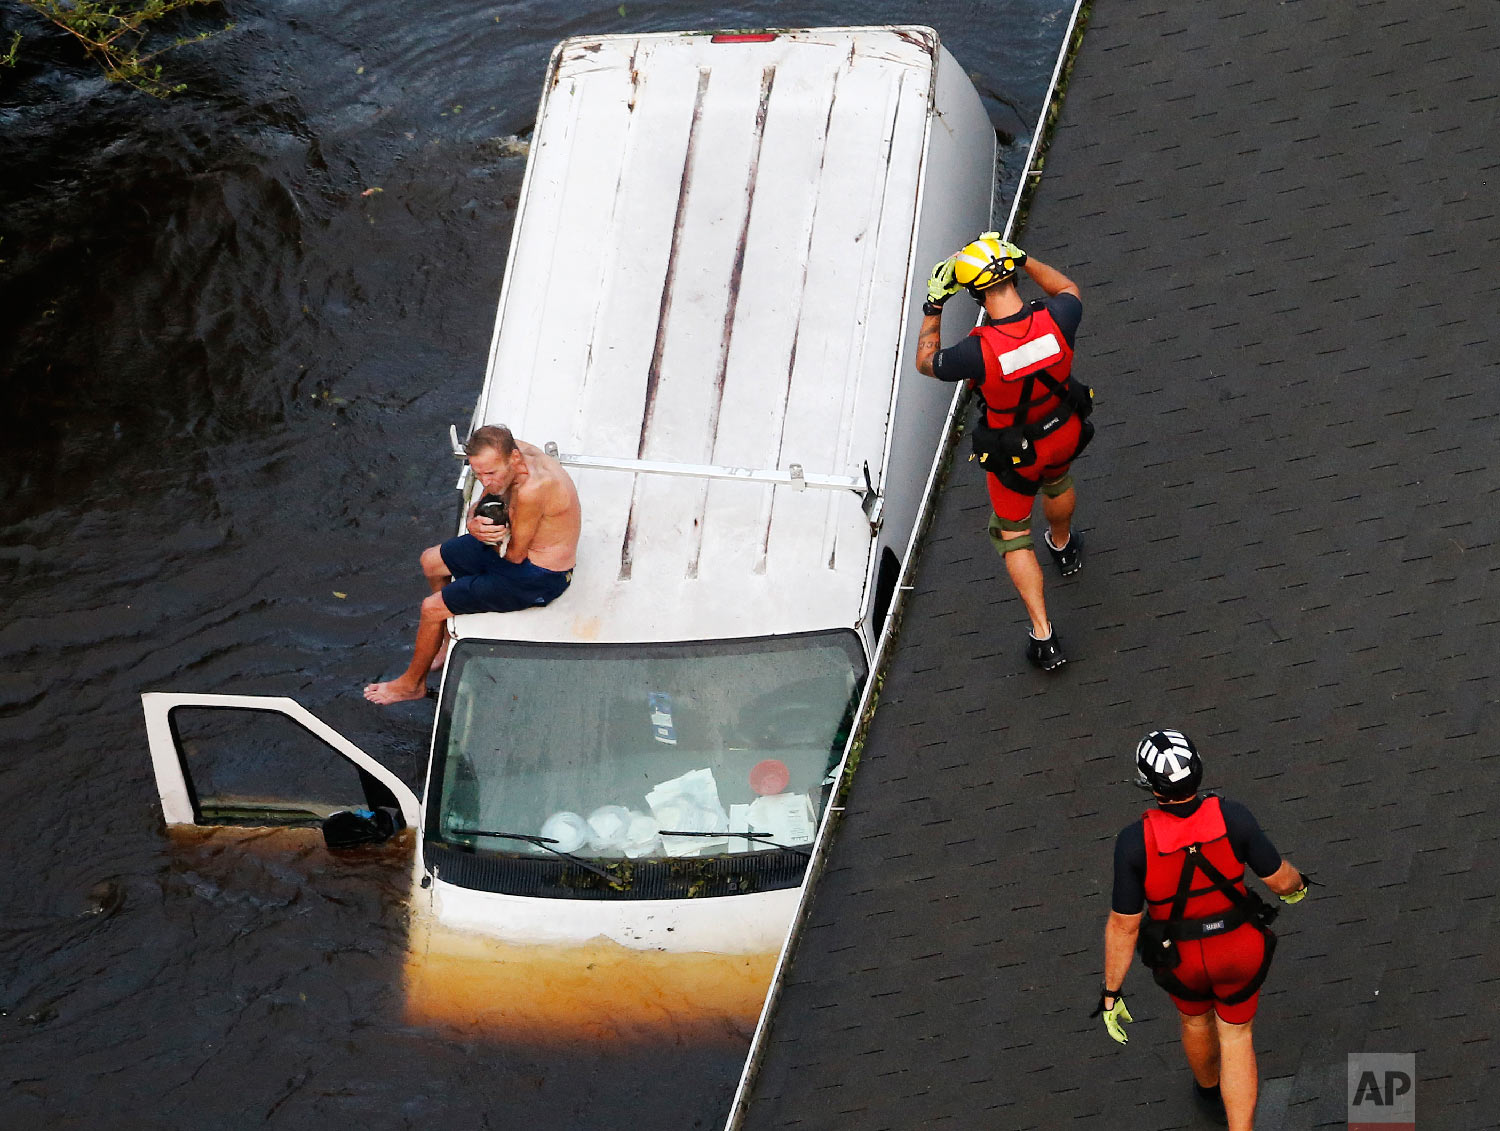  U.S. Coast Guard rescue swimmers Samuel Knoeppel, center, and Randy Haba, bottom right, approach Willie Schubert on a stranded van in Pollocksville, N.C., on Sept. 17, 2018, in the aftermath of Hurricane Florence. (AP Photo/Steve Helber) 